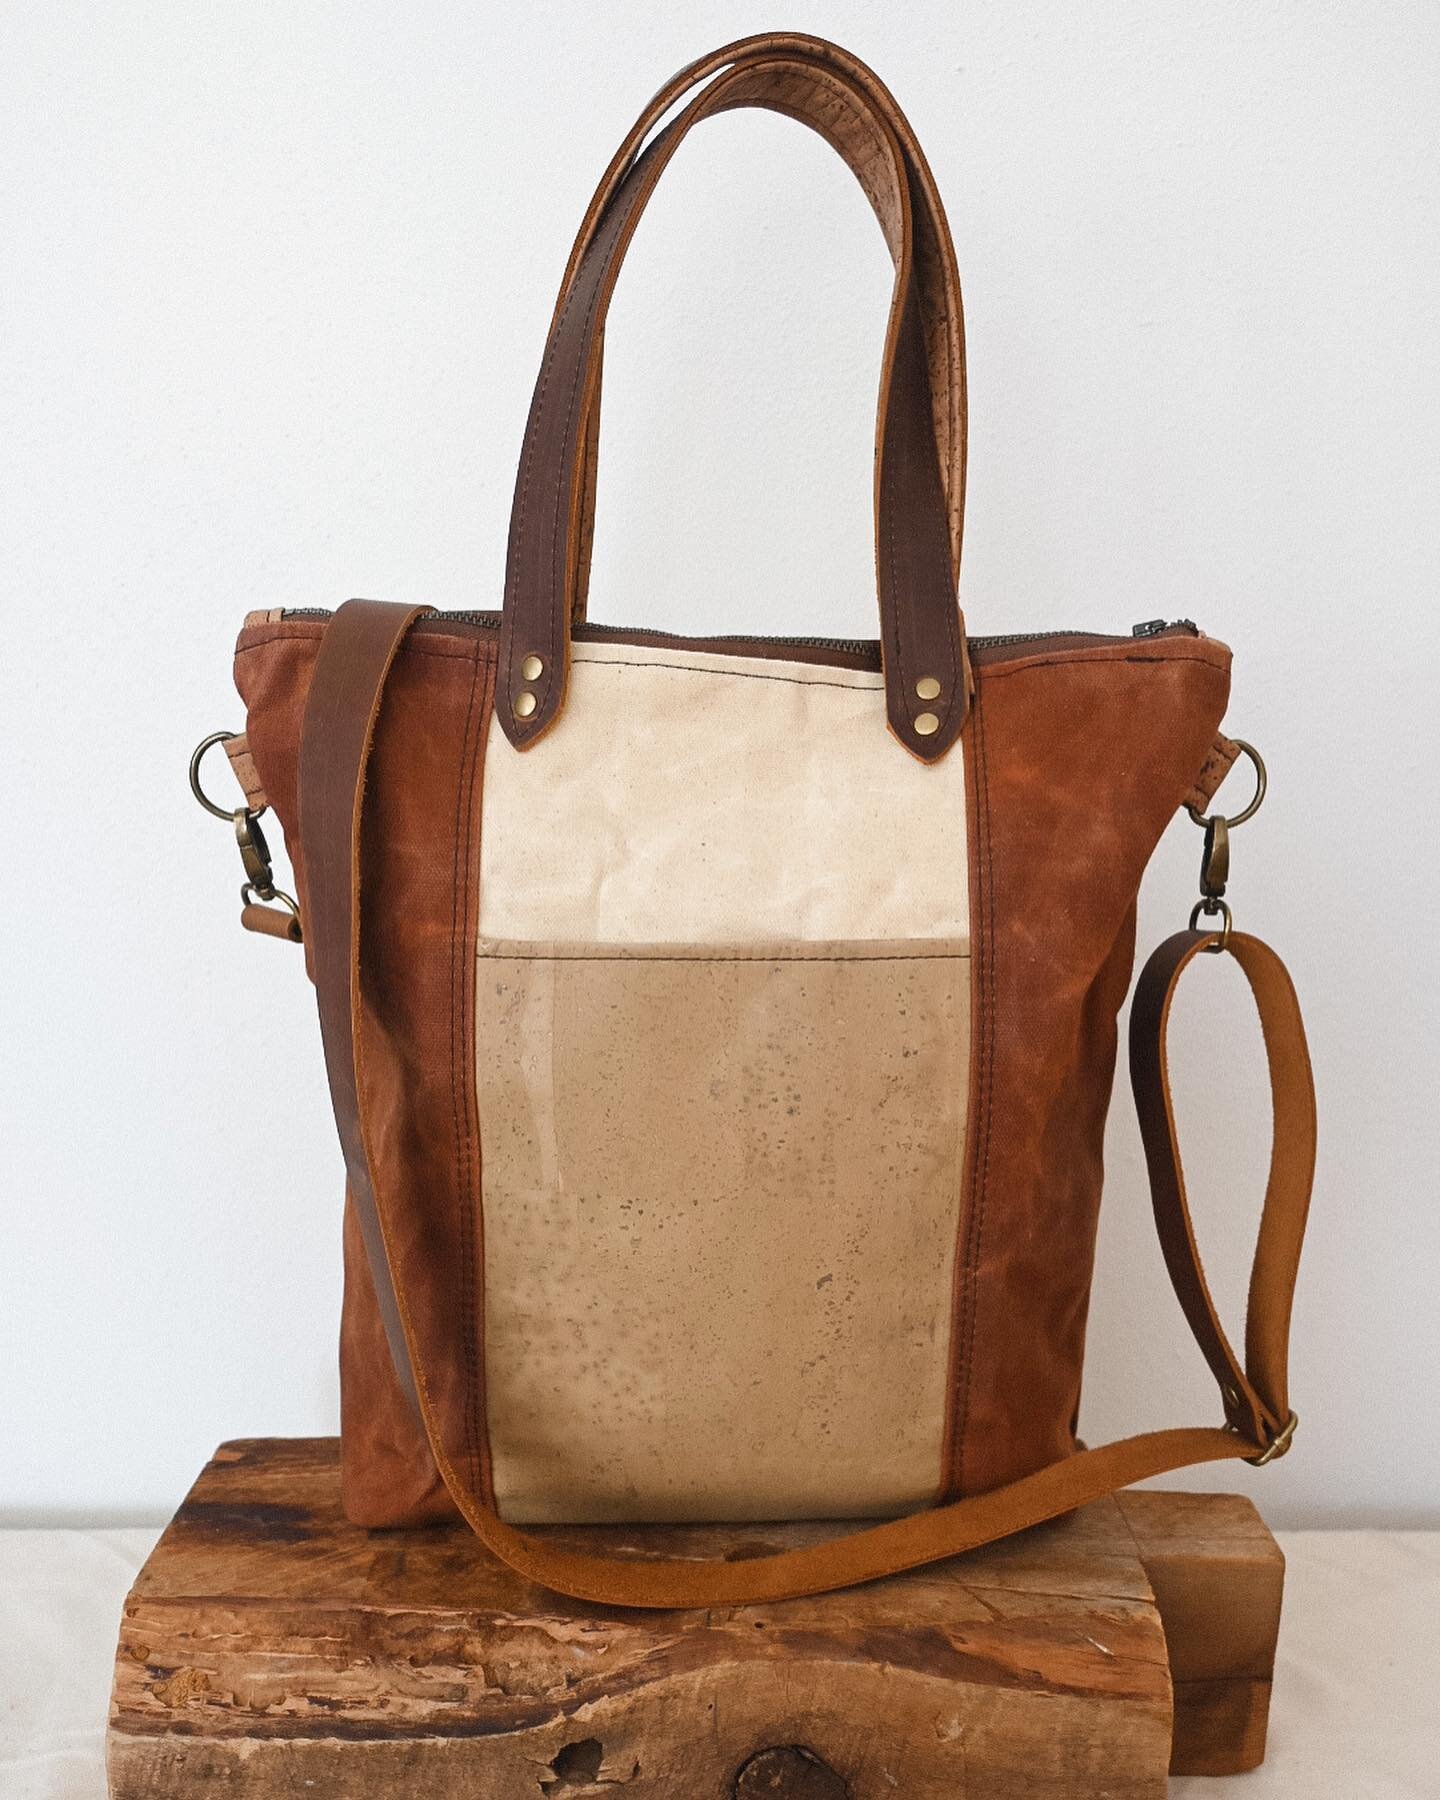 C R O S S B O D Y &bull; TOTE

The perfect bag to take out and about for daily activities and errands. A great &ldquo;in-between&rdquo; size, when you don&rsquo;t want to carry too much, or too little.

This bag features a rich copper and natural wax